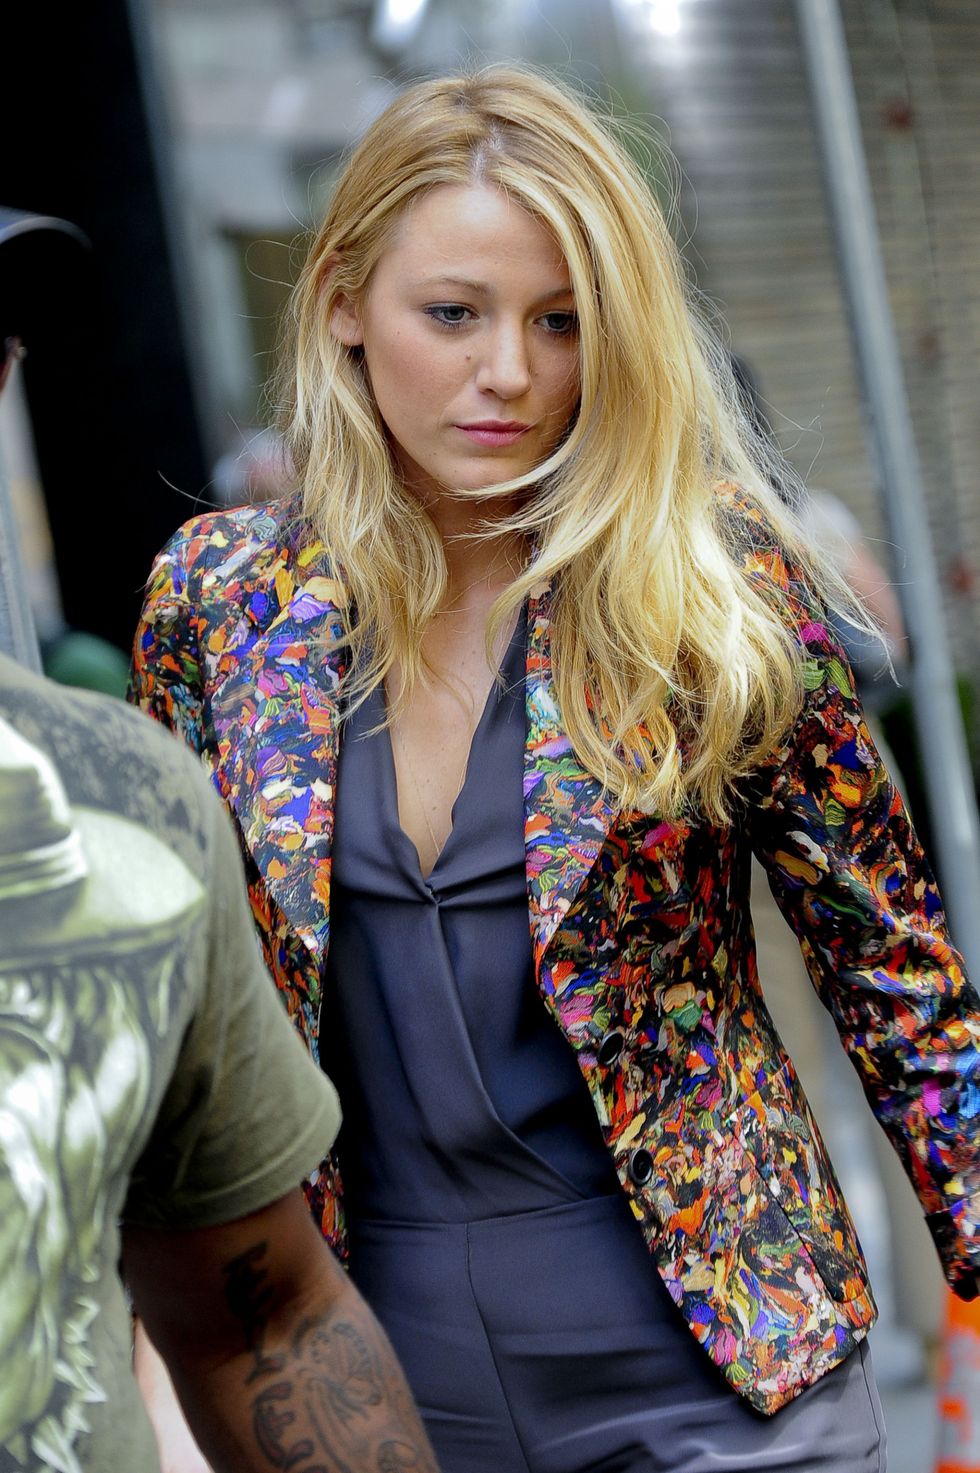 NEW YORK - JULY 06:  Actress Blake Lively walks to the "Gossip Girl" film set in Midtown Manhattan on July 06, 2009 in New York City.  (Photo by Ray Tamarra/Getty Images)